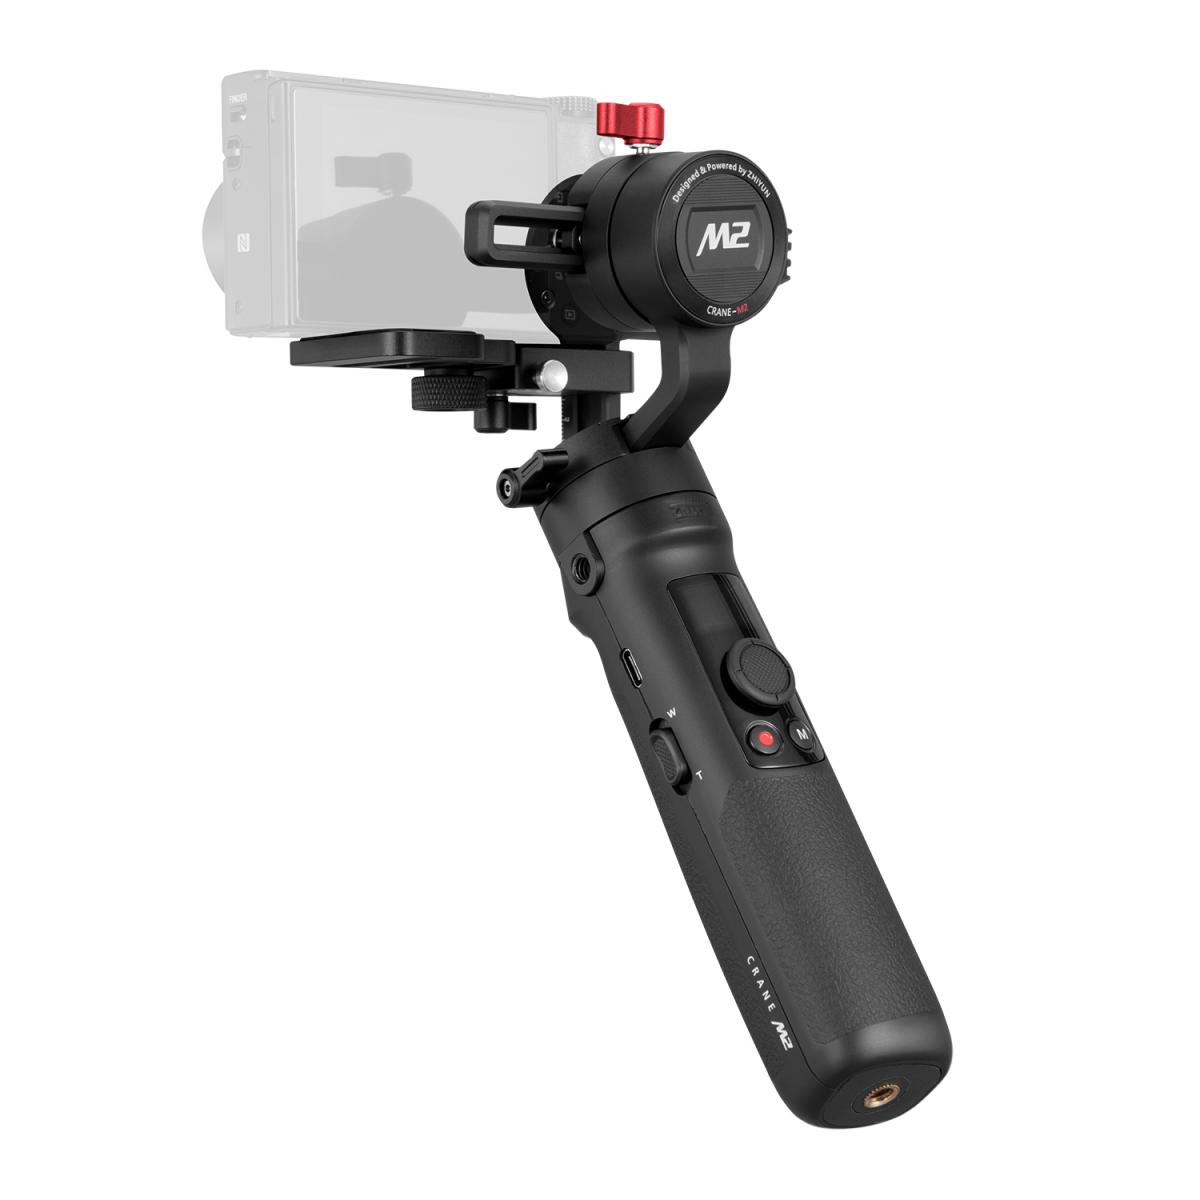 3 Axis Handheld Stabilizer for Sony A6000/A6300/A6400/A6500/Canon M6/G7 X Mark II 720g Max Payload Official Dealer Quick On/Off For Smartphones Zhiyun Crane M2 Gimbal For GoPro Hero 7/6/5